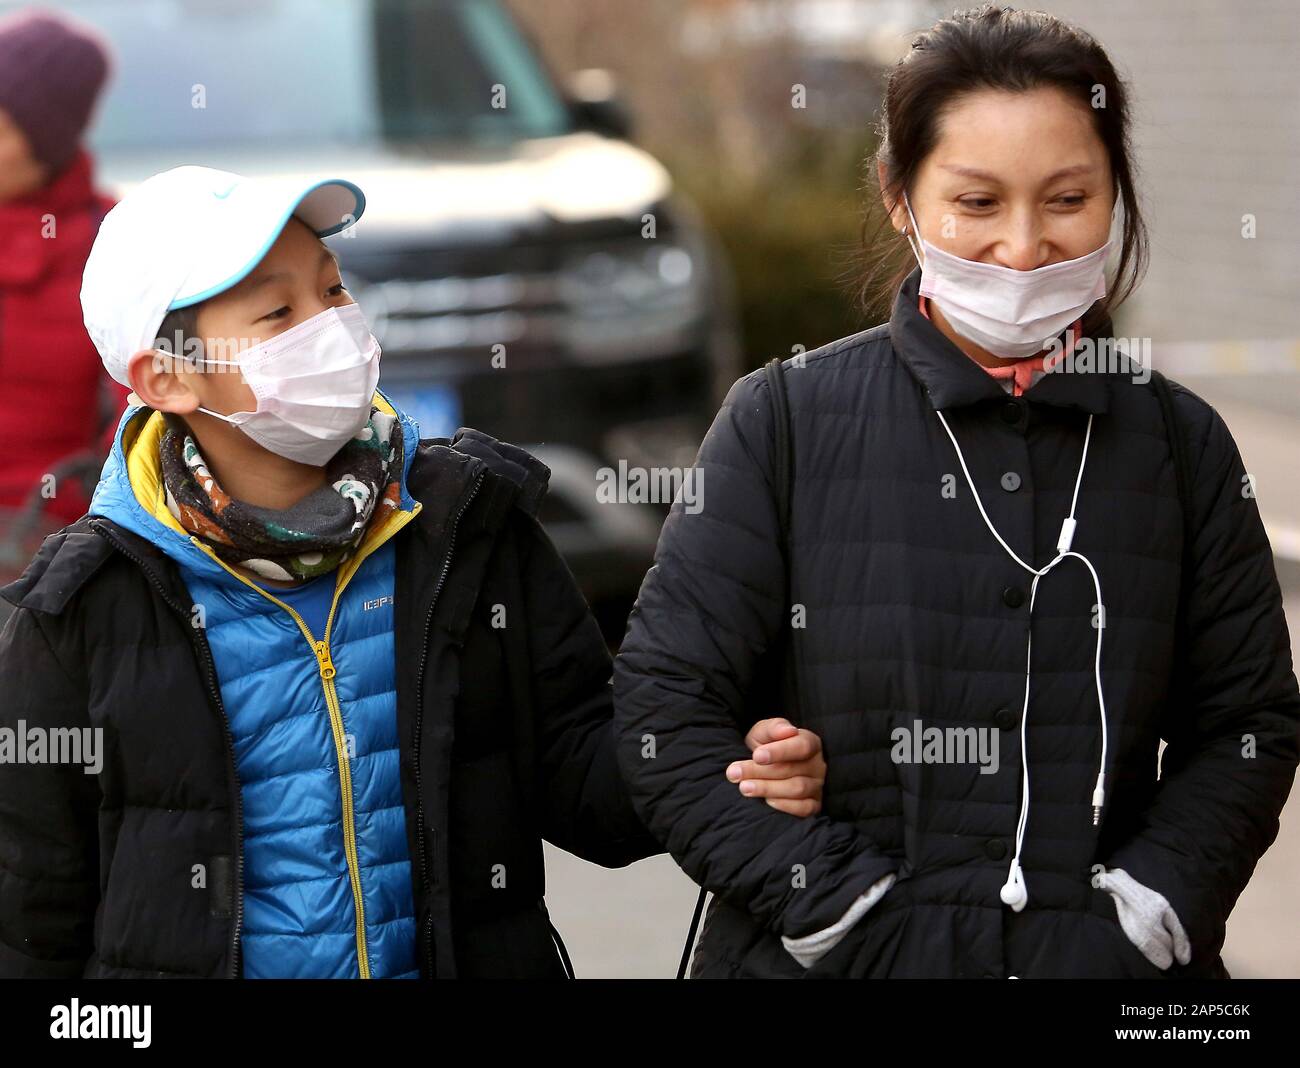 Beijing, China. 21st Jan, 2020. Chinese wear protective respiratory masks in downtown Beijing on Tuesday, January 21, 2020. Health authorities in China reported the country's fourth death from a new type of coronavirus, as the country braces for the Lunar New Year travel boom amid concerns over a possible outbreak similar to that of the SARS virus in the early 2000s. Photo by Stephen Shaver/UPI Credit: UPI/Alamy Live News Stock Photo